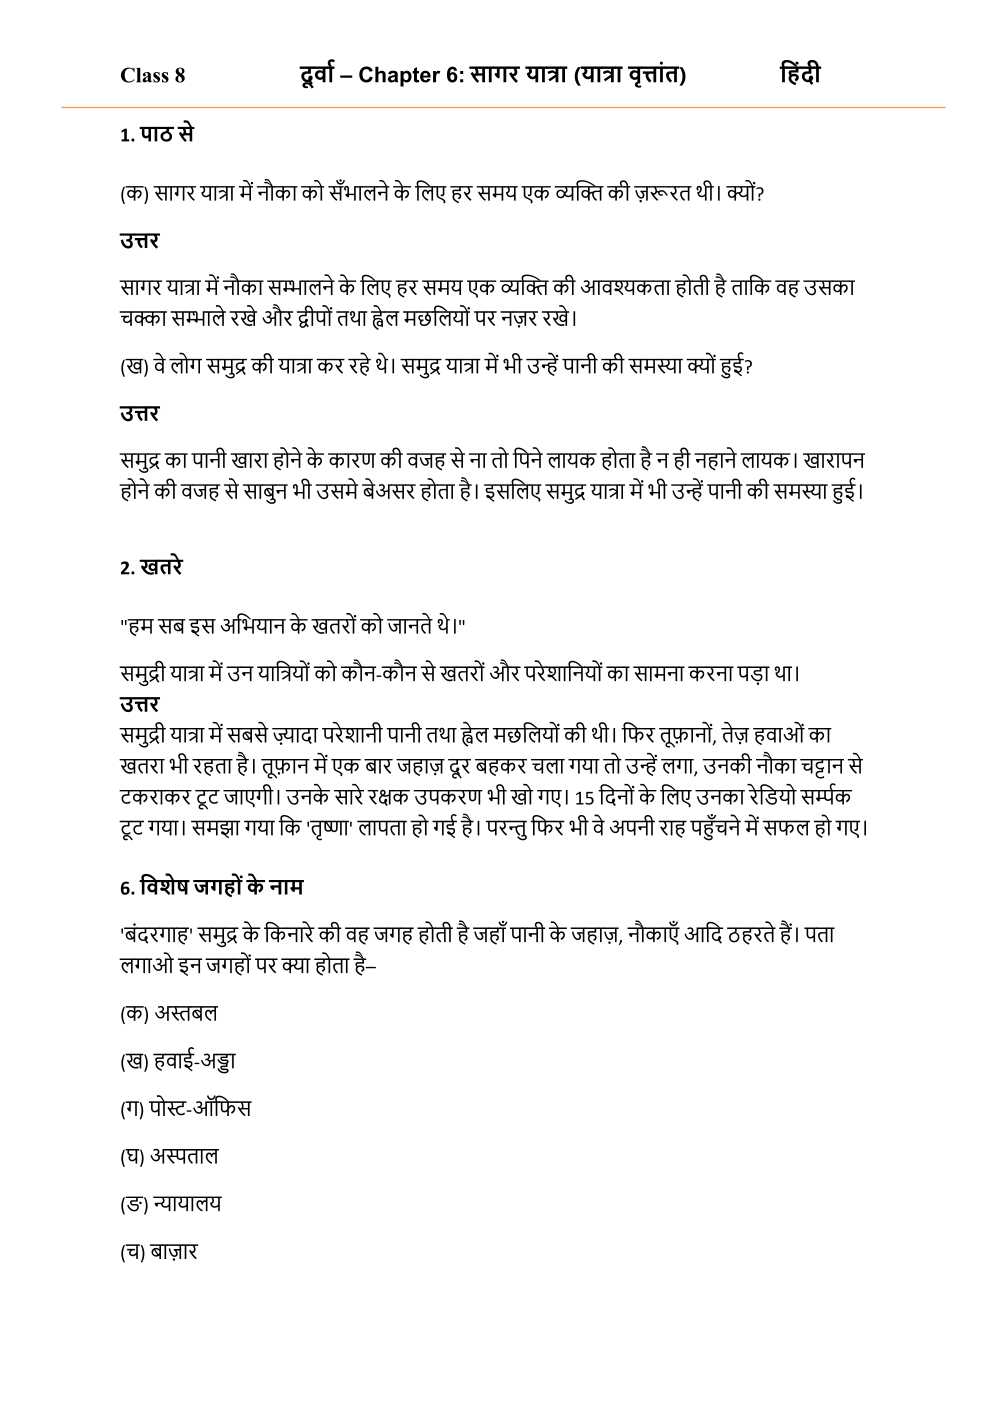 NCERT Solutions For Class 8 Hindi Durva Chapter 6